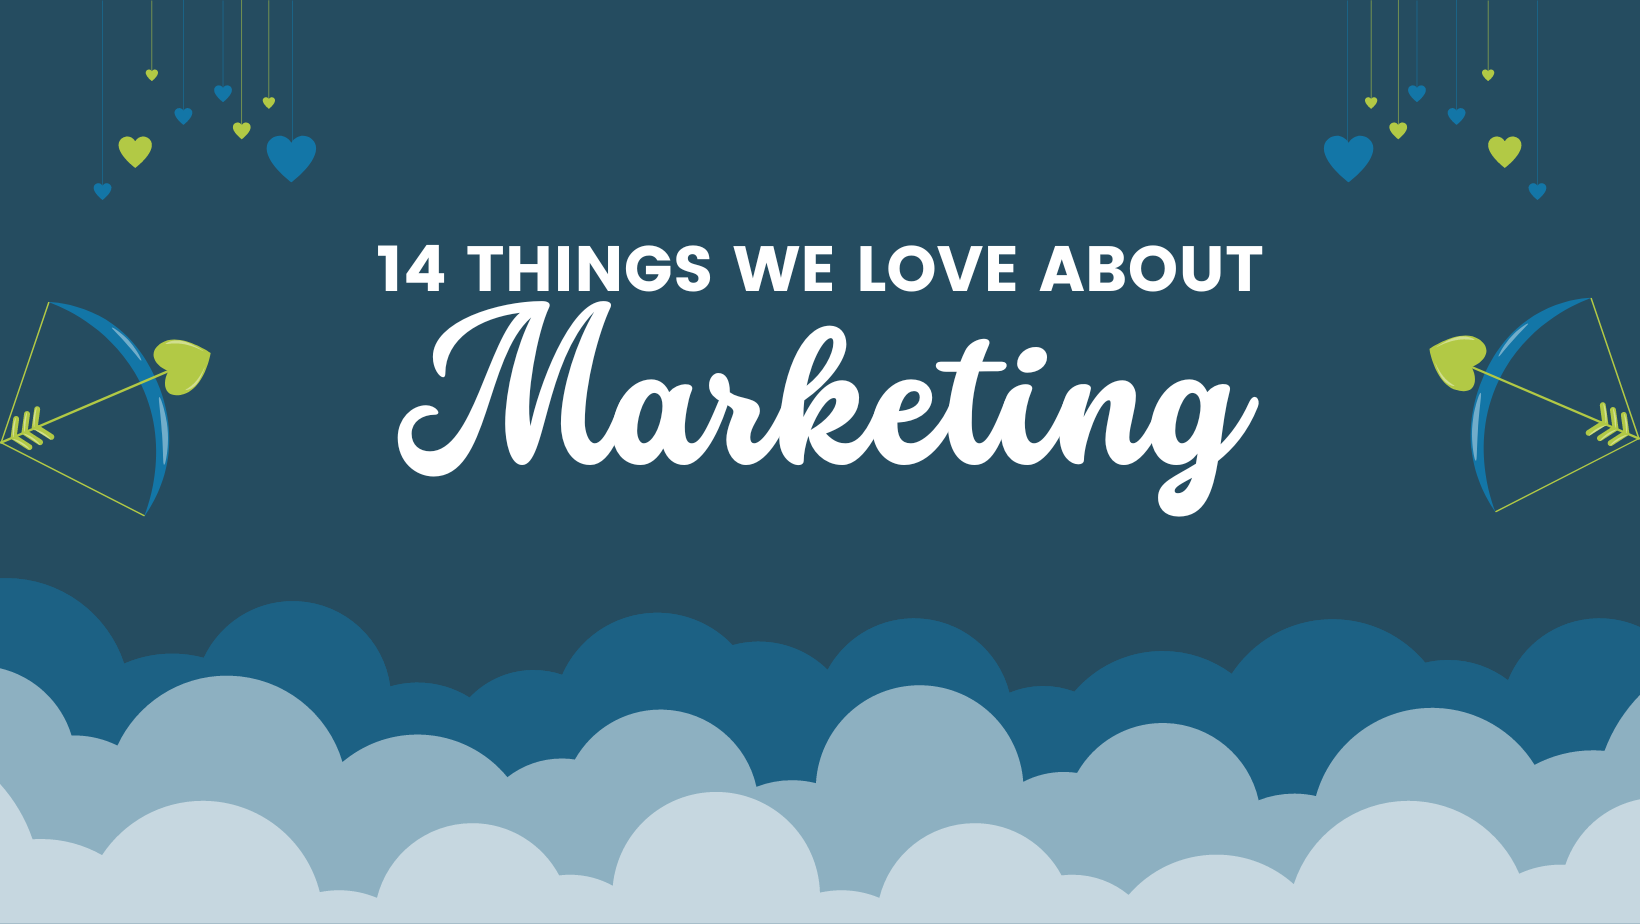 14 Things We Love About Marketing